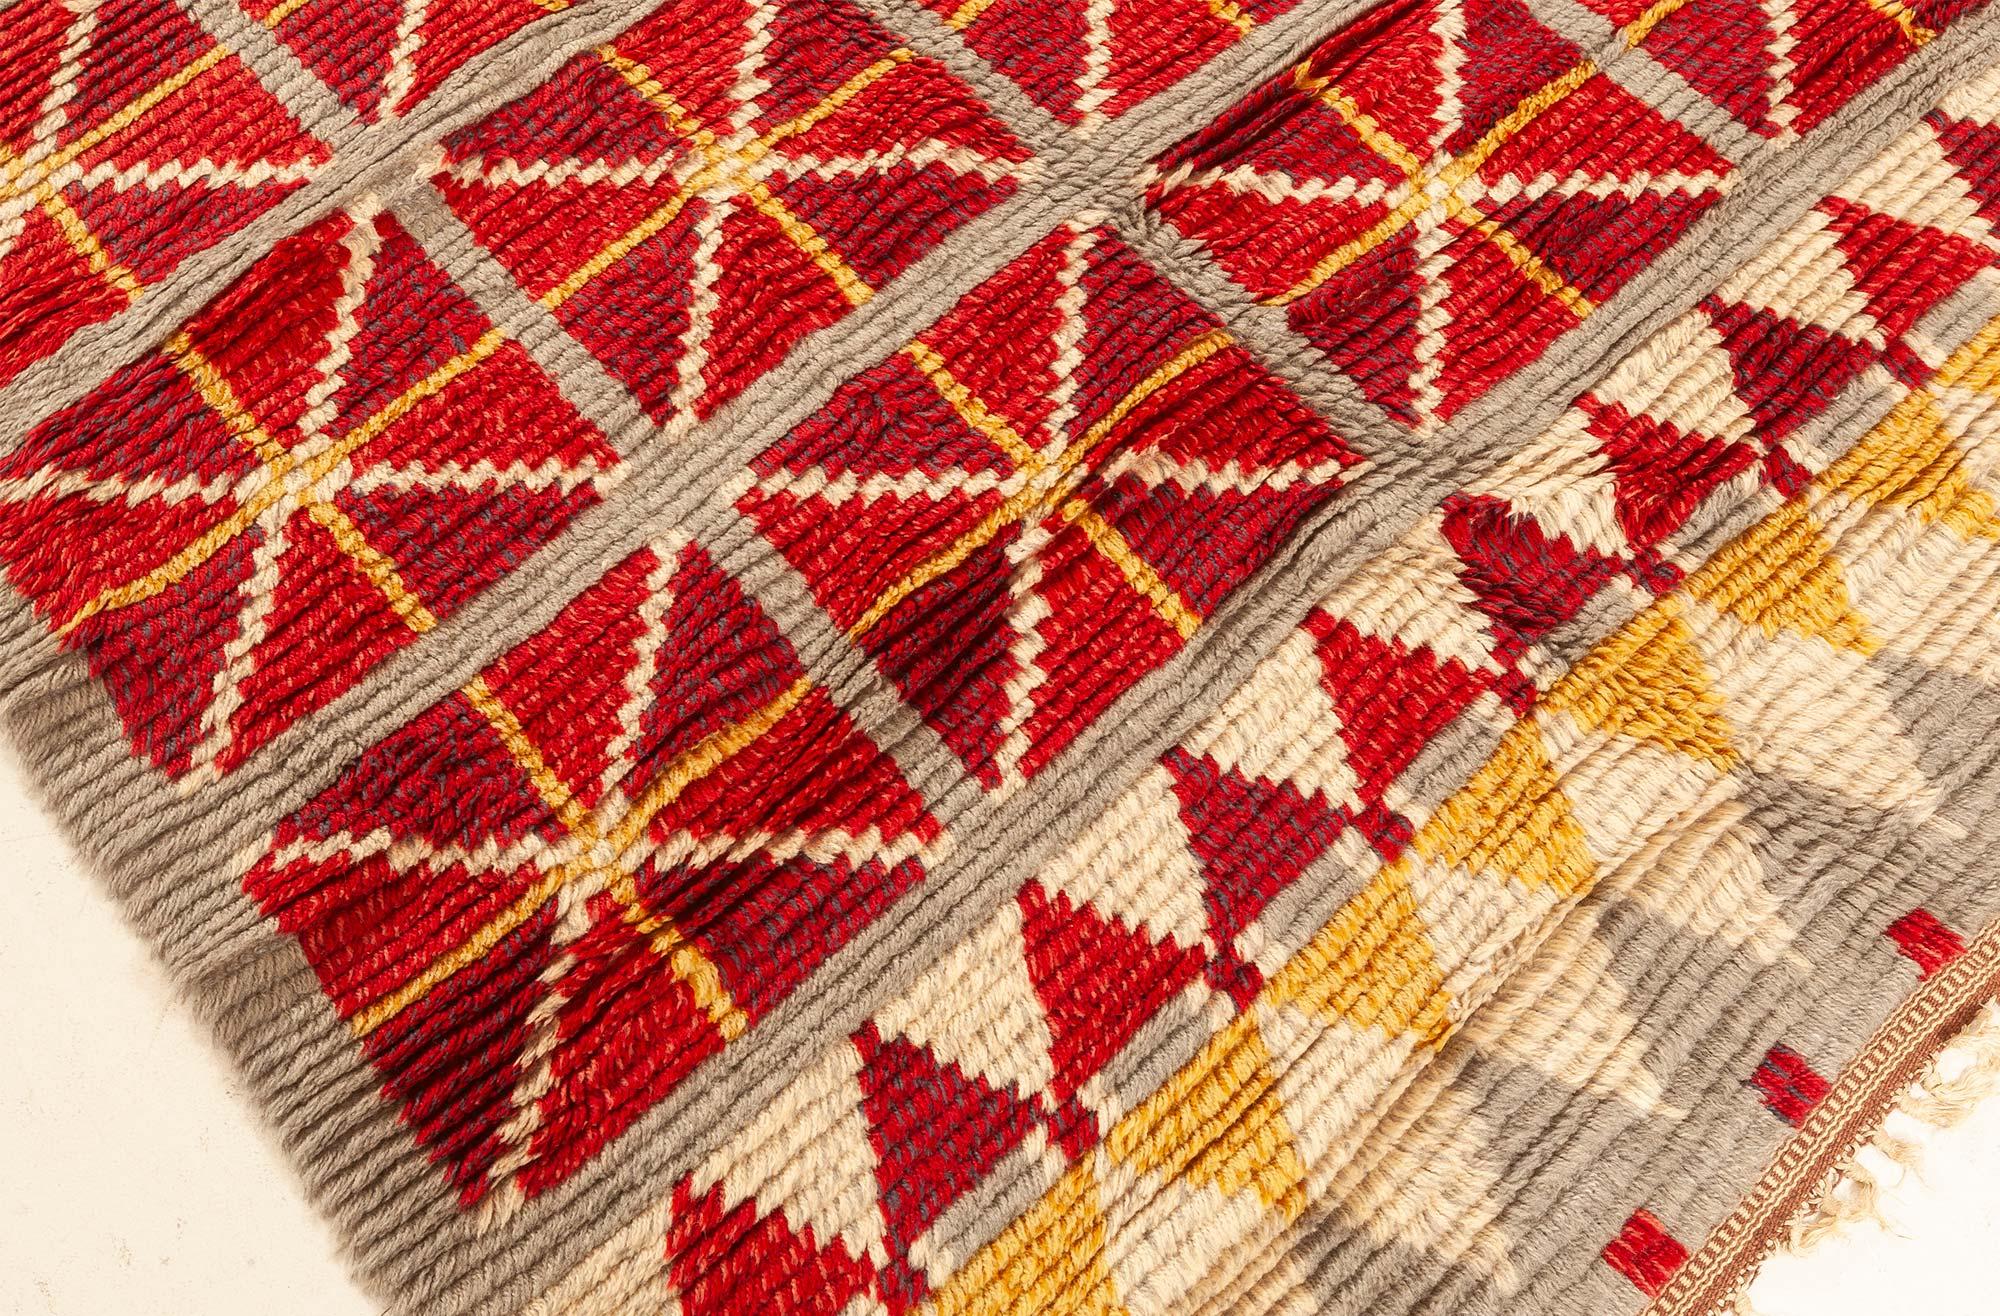 Mid-20th century Swedish Bold Red, Gray, White, Yellow Hand Knotted Wool Rug
Size: 4'8